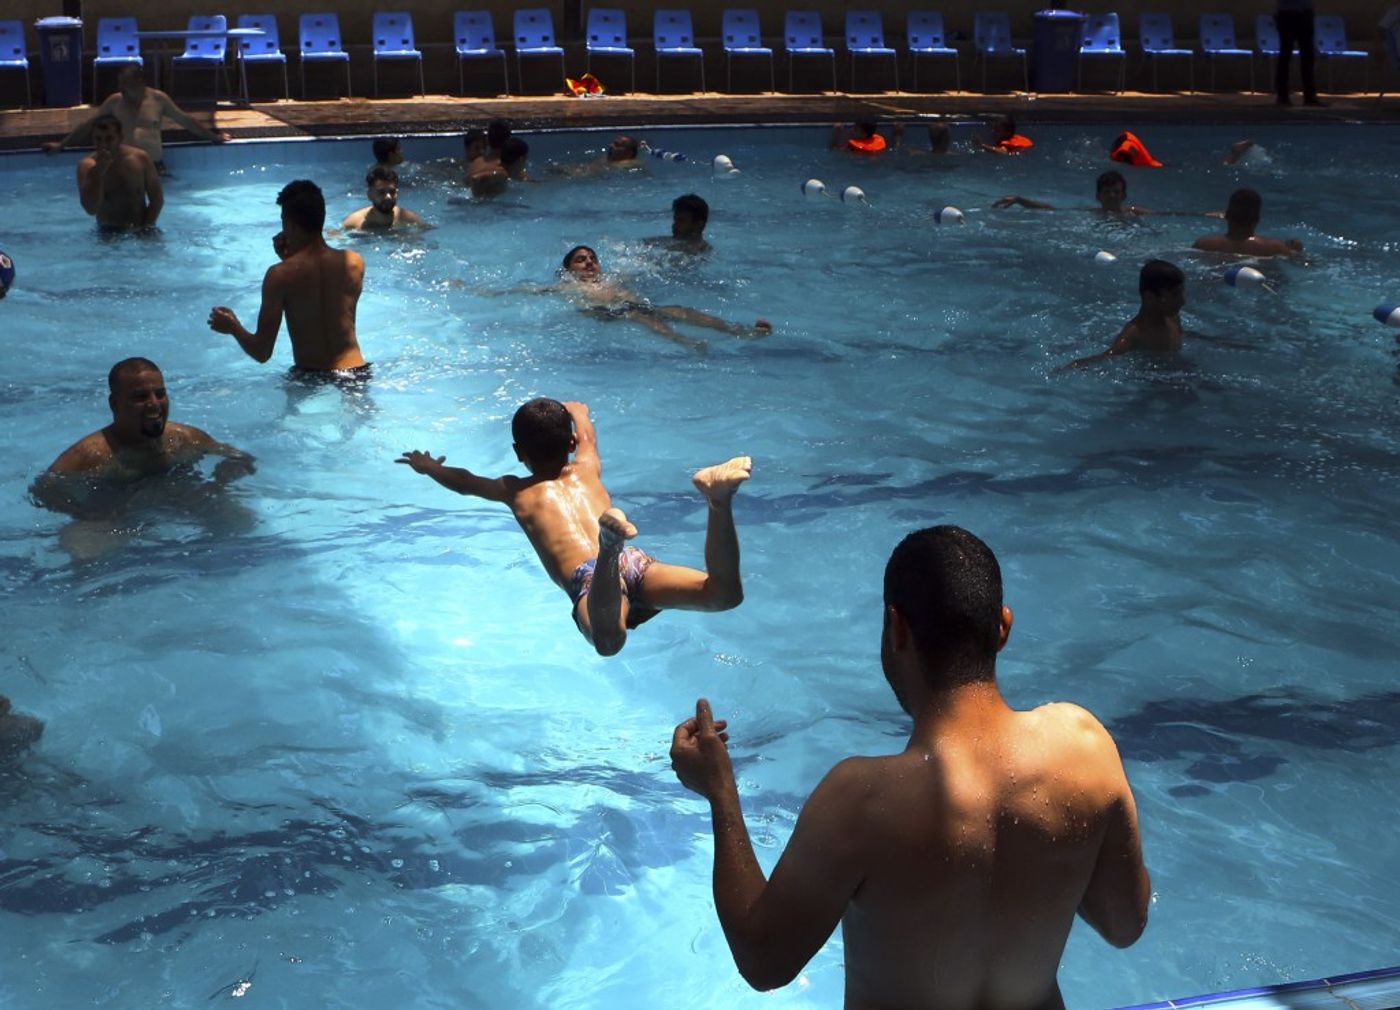 People escape the searing summer heat at a swimming pool in in Basra, Iraq, on Aug. 1. The temperature that day reached 120 degrees. (Nabil Al-Jurani/AP)